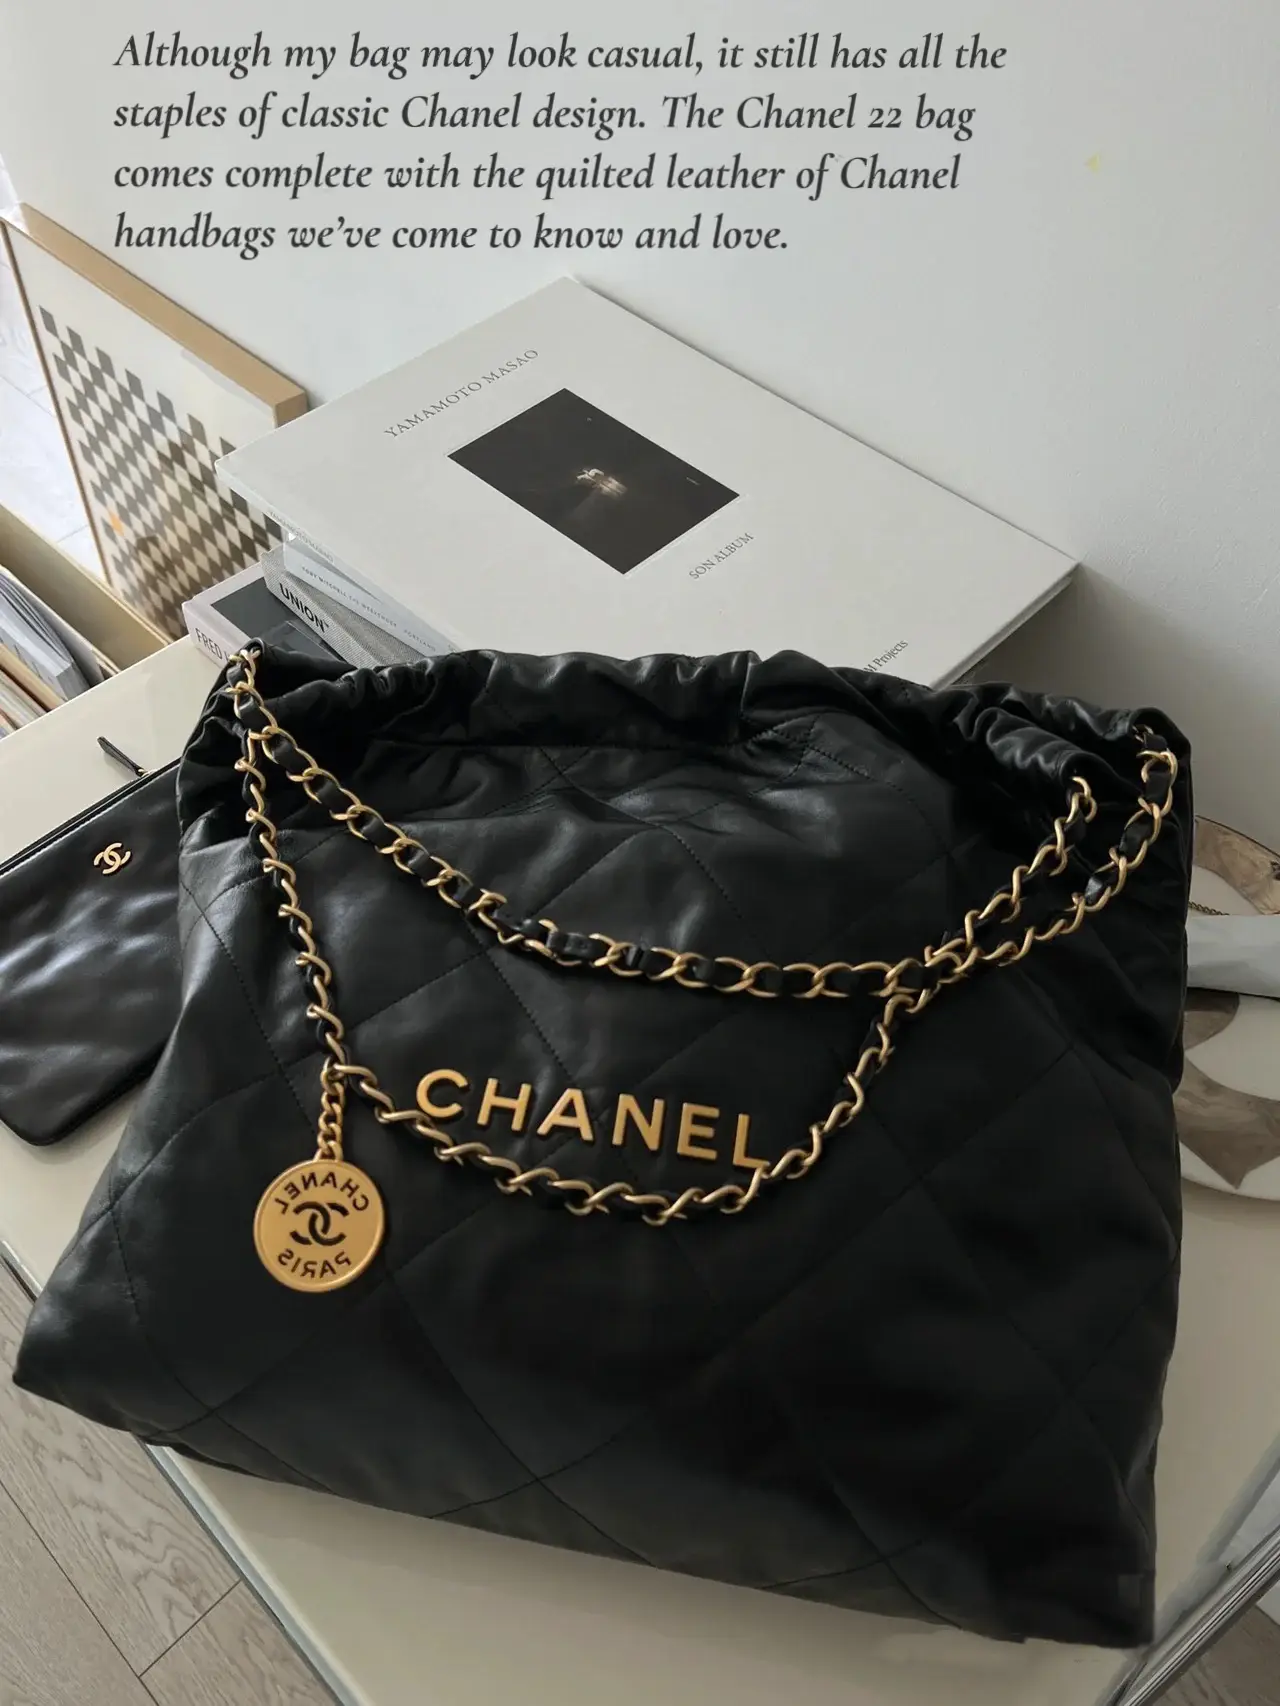 Reviewing My Chanel 22 Hand Bag in Black